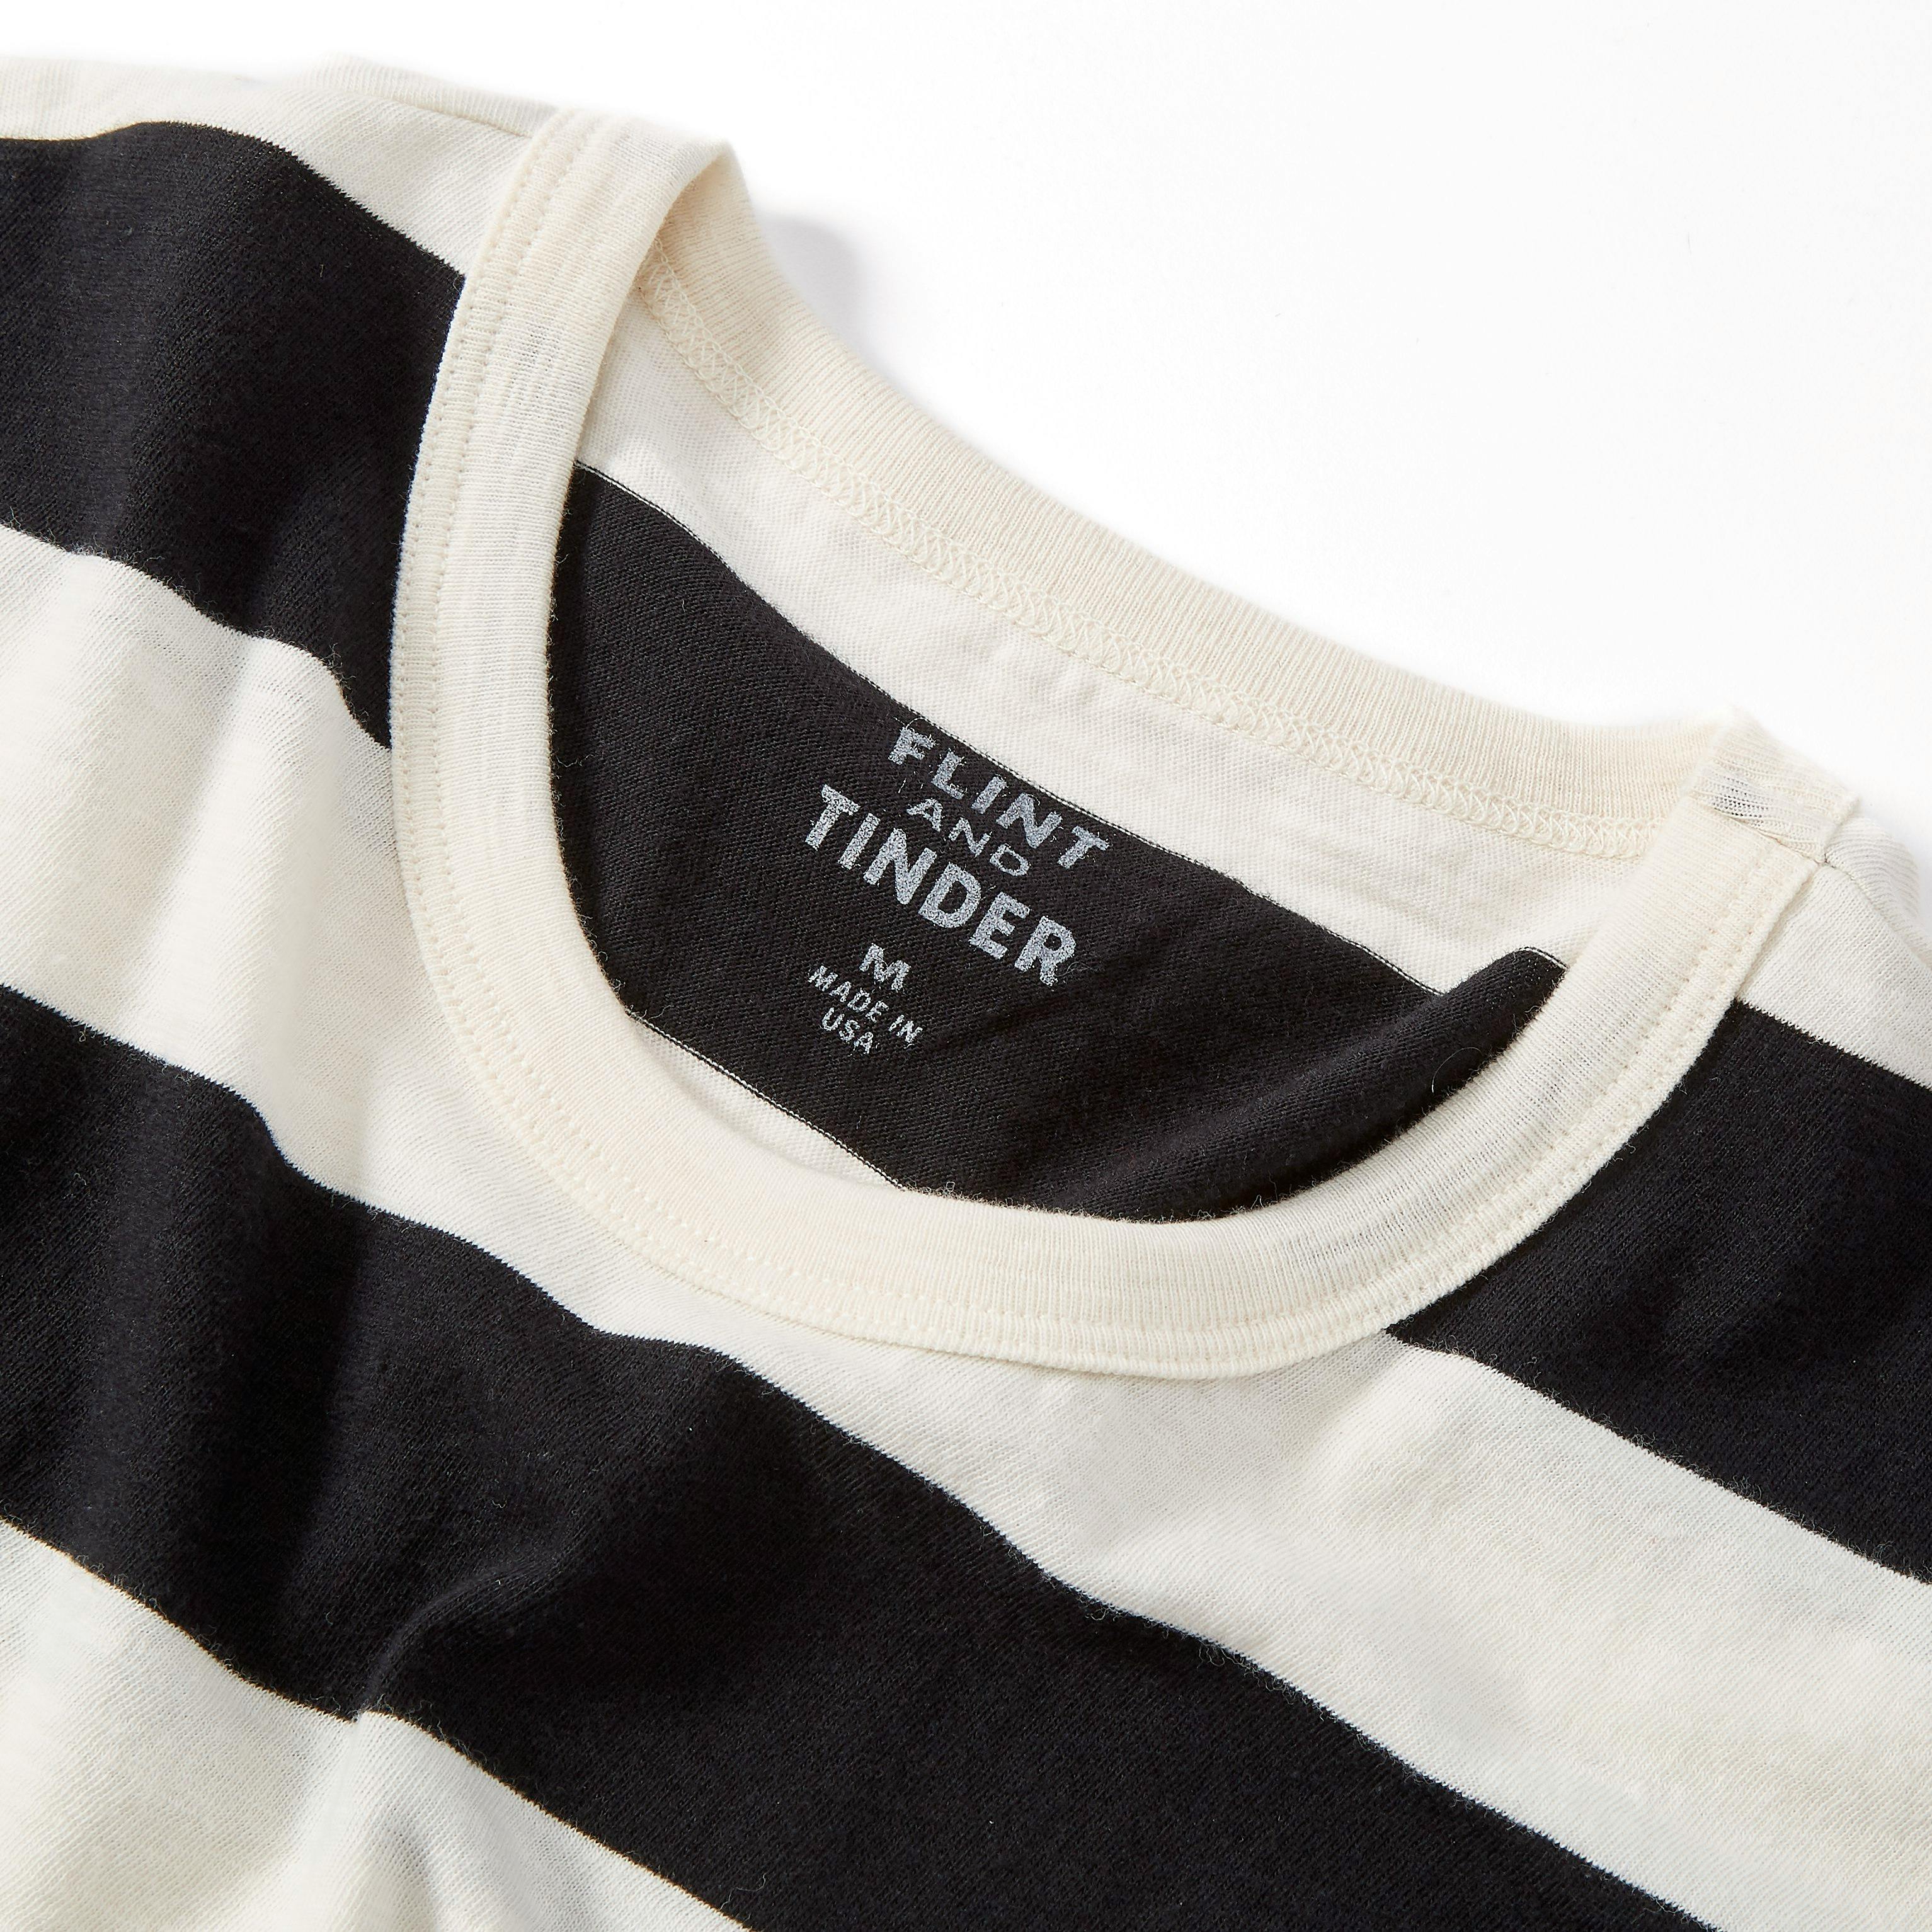 Flint and Tinder Rugby Stripe Tee